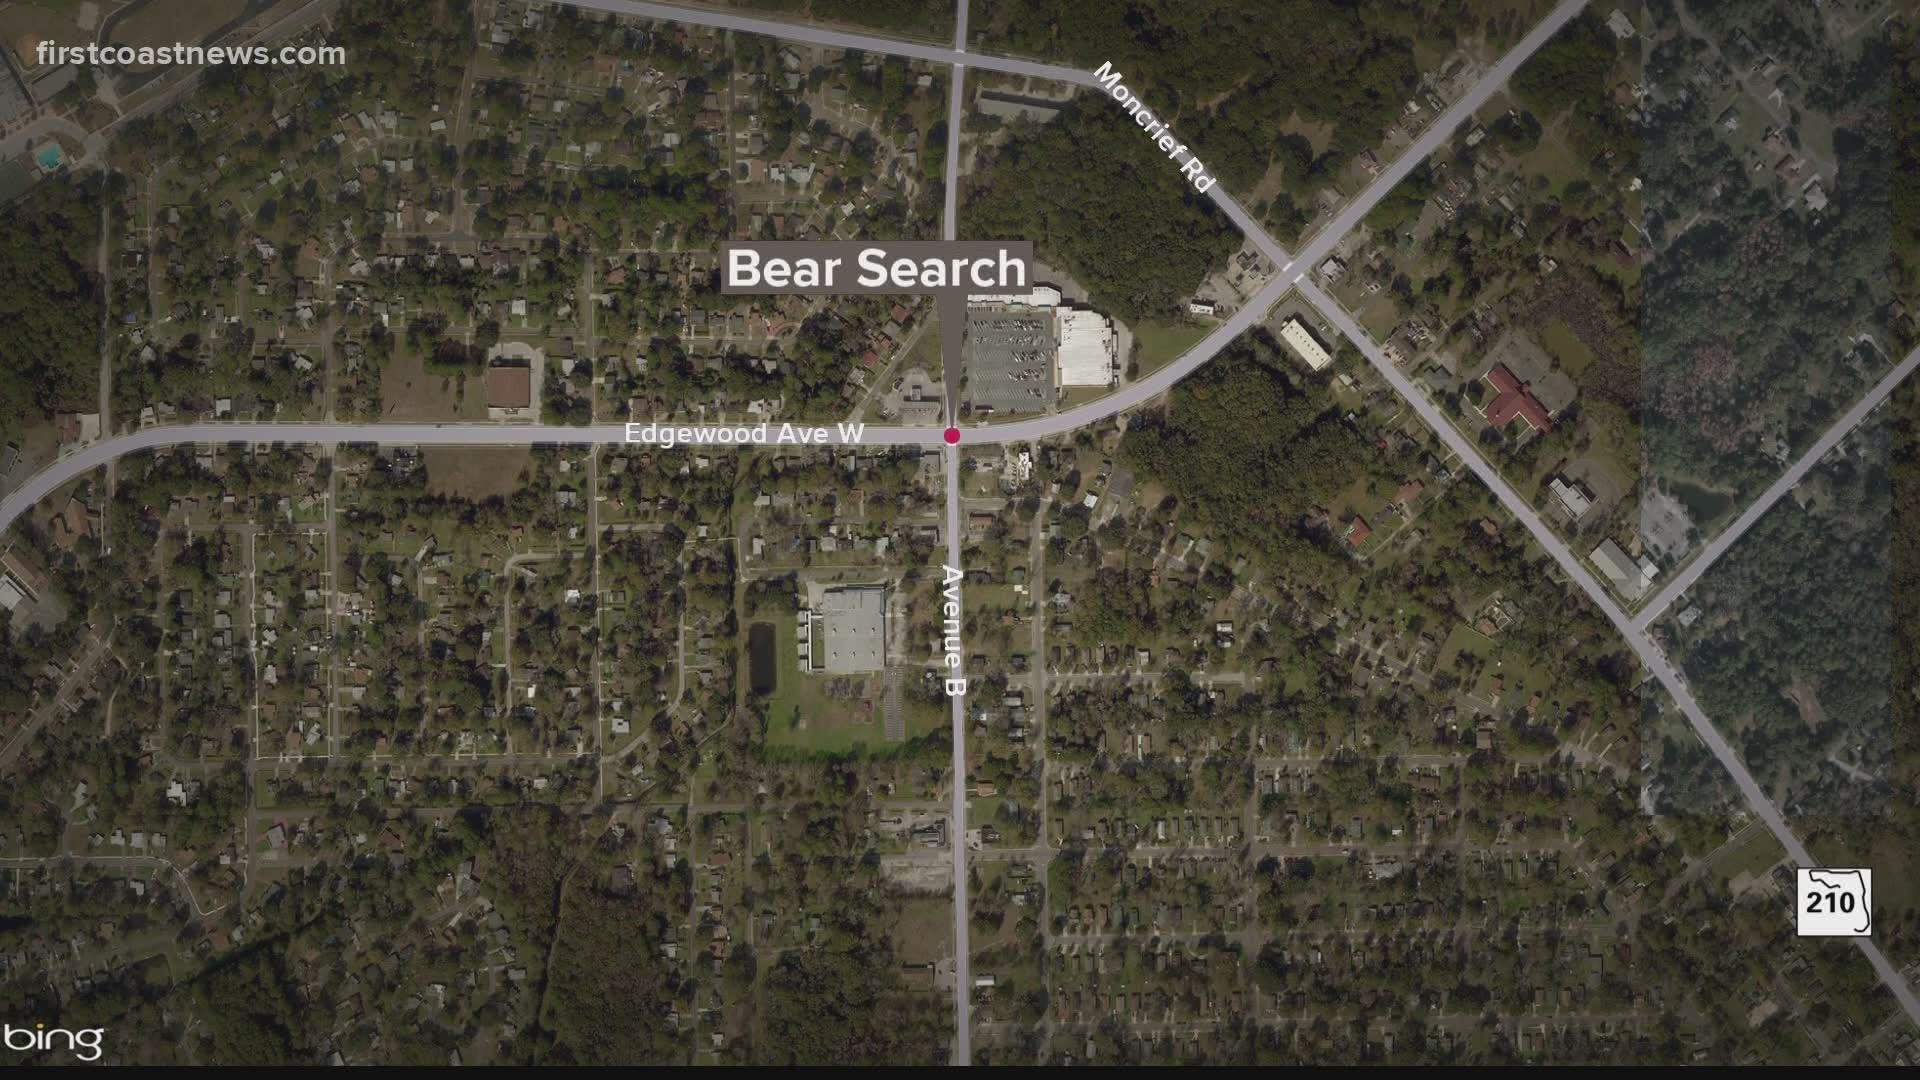 JSO says do not approach or agitate the bear if you spot it.